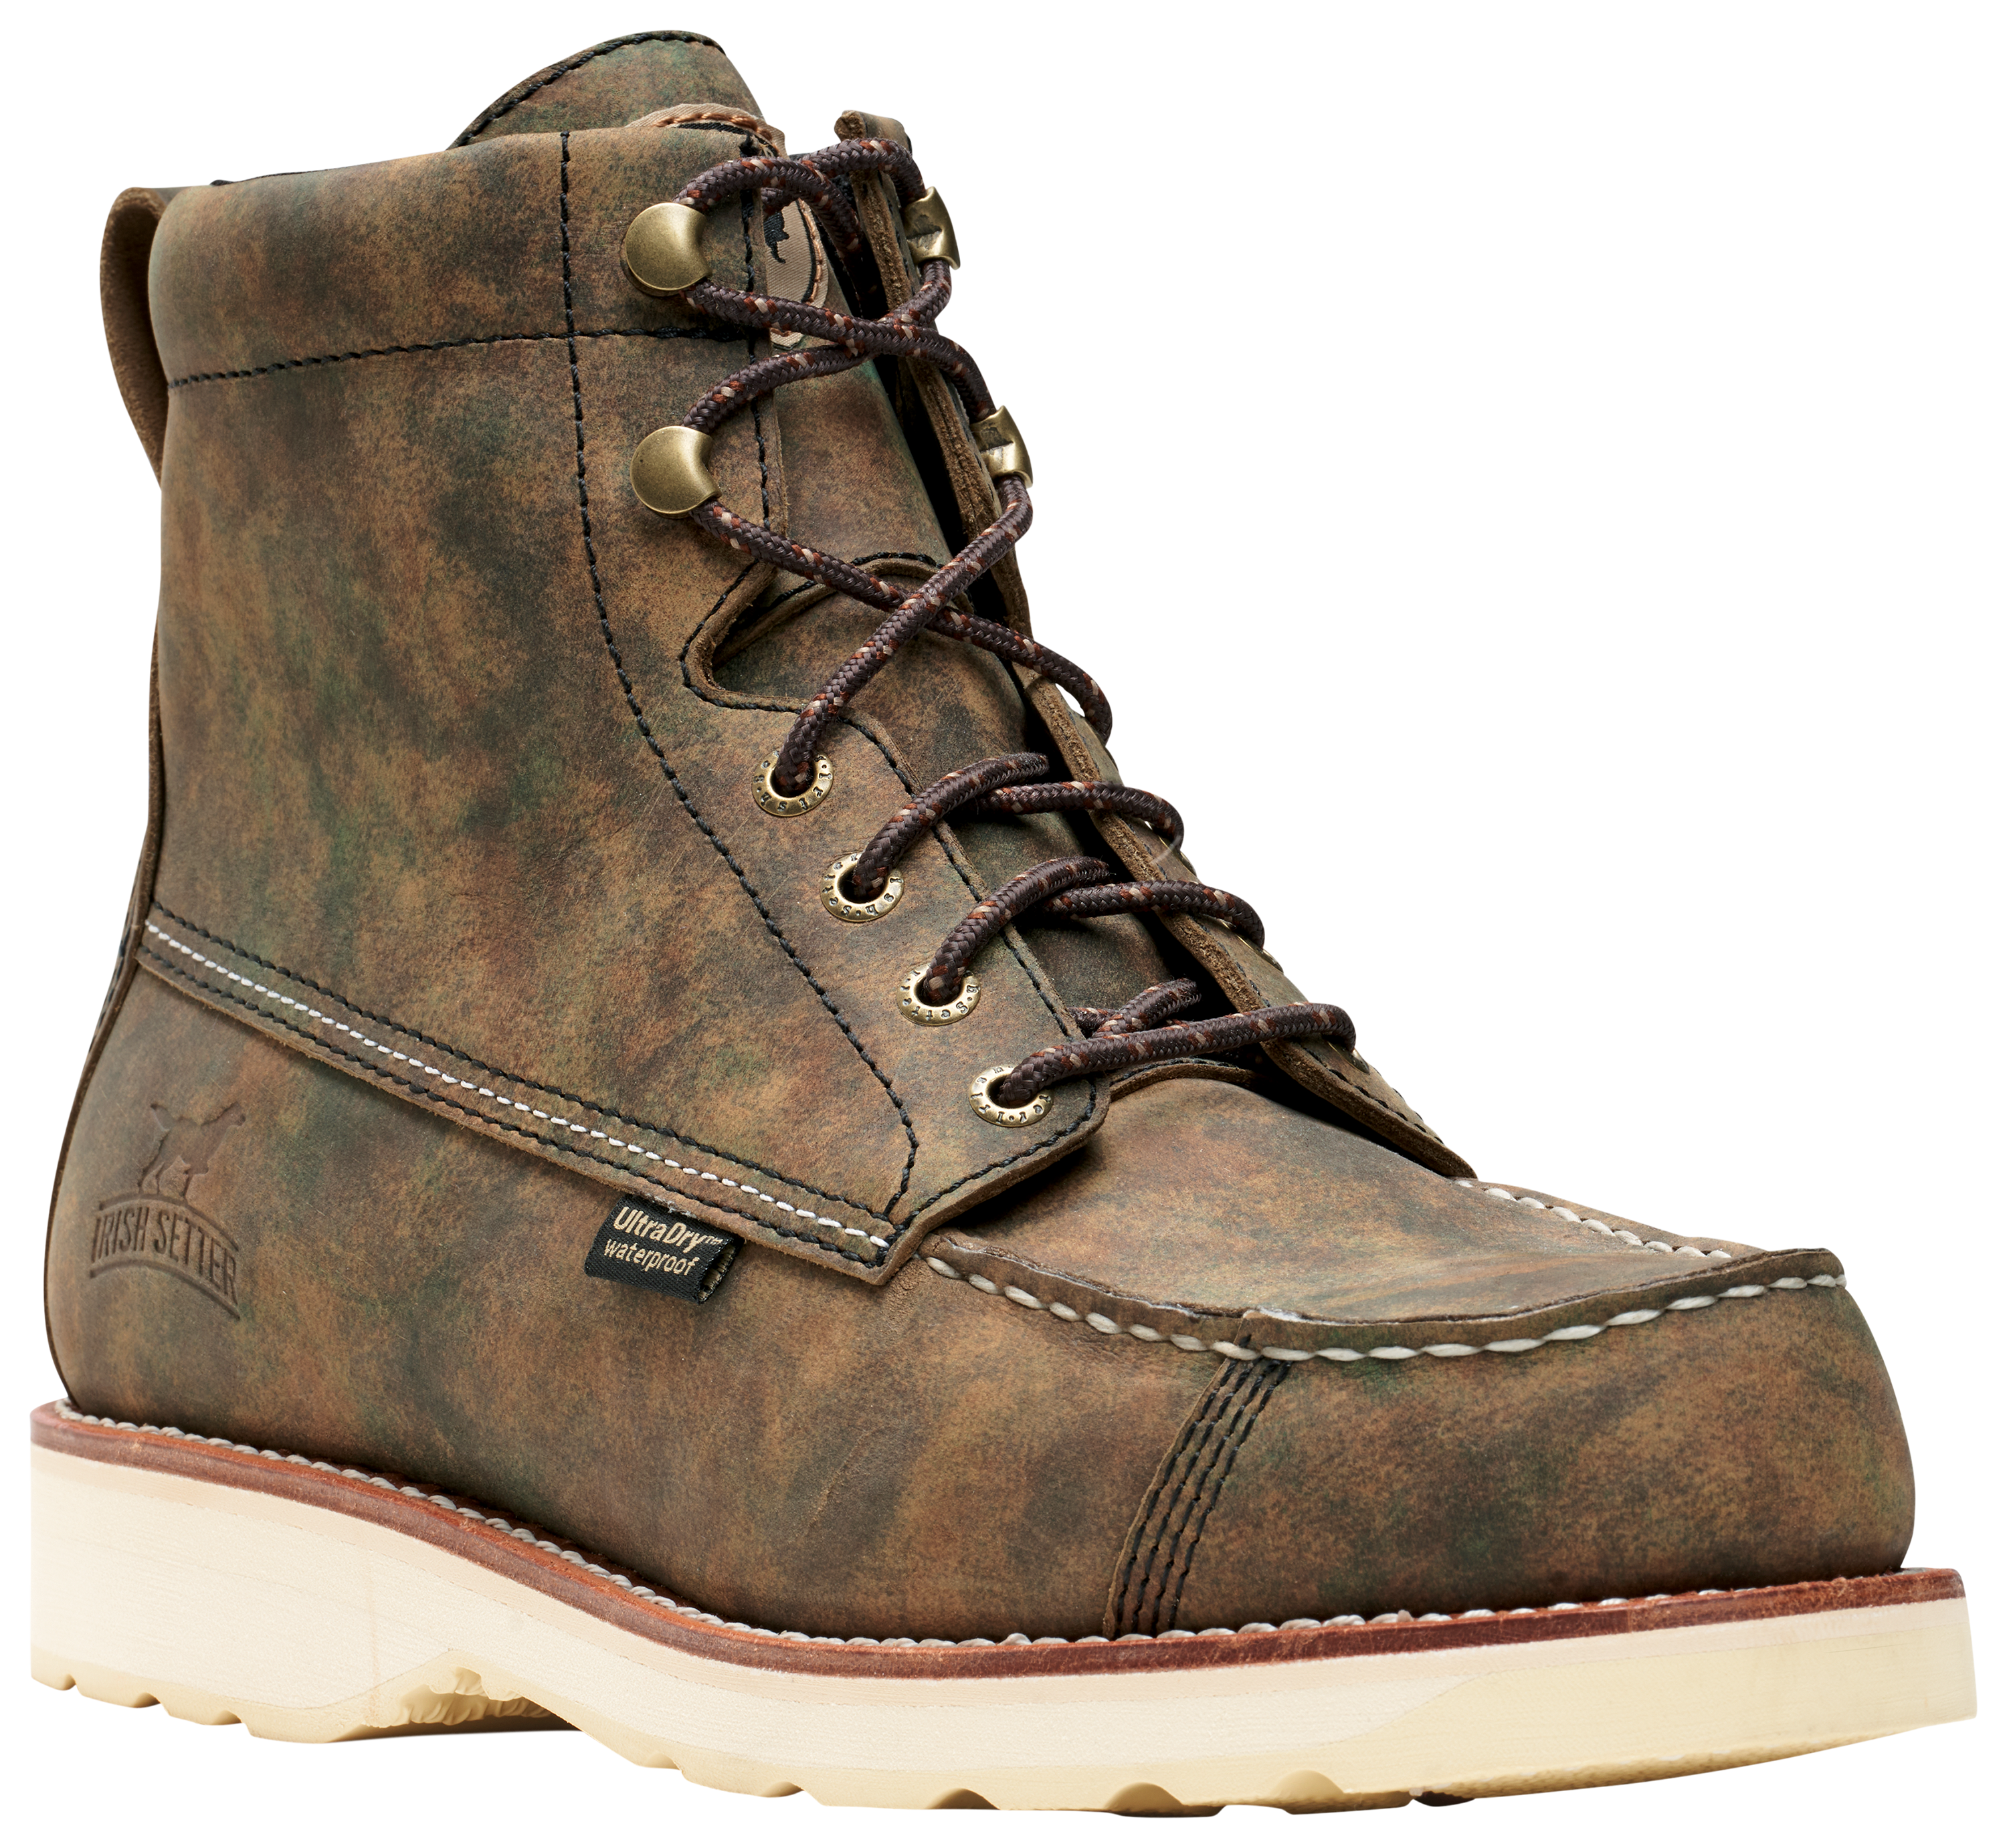 Irish Setter Wingshooter 7 Waterproof Hunting Boots for Men - Earth Camo - 12W